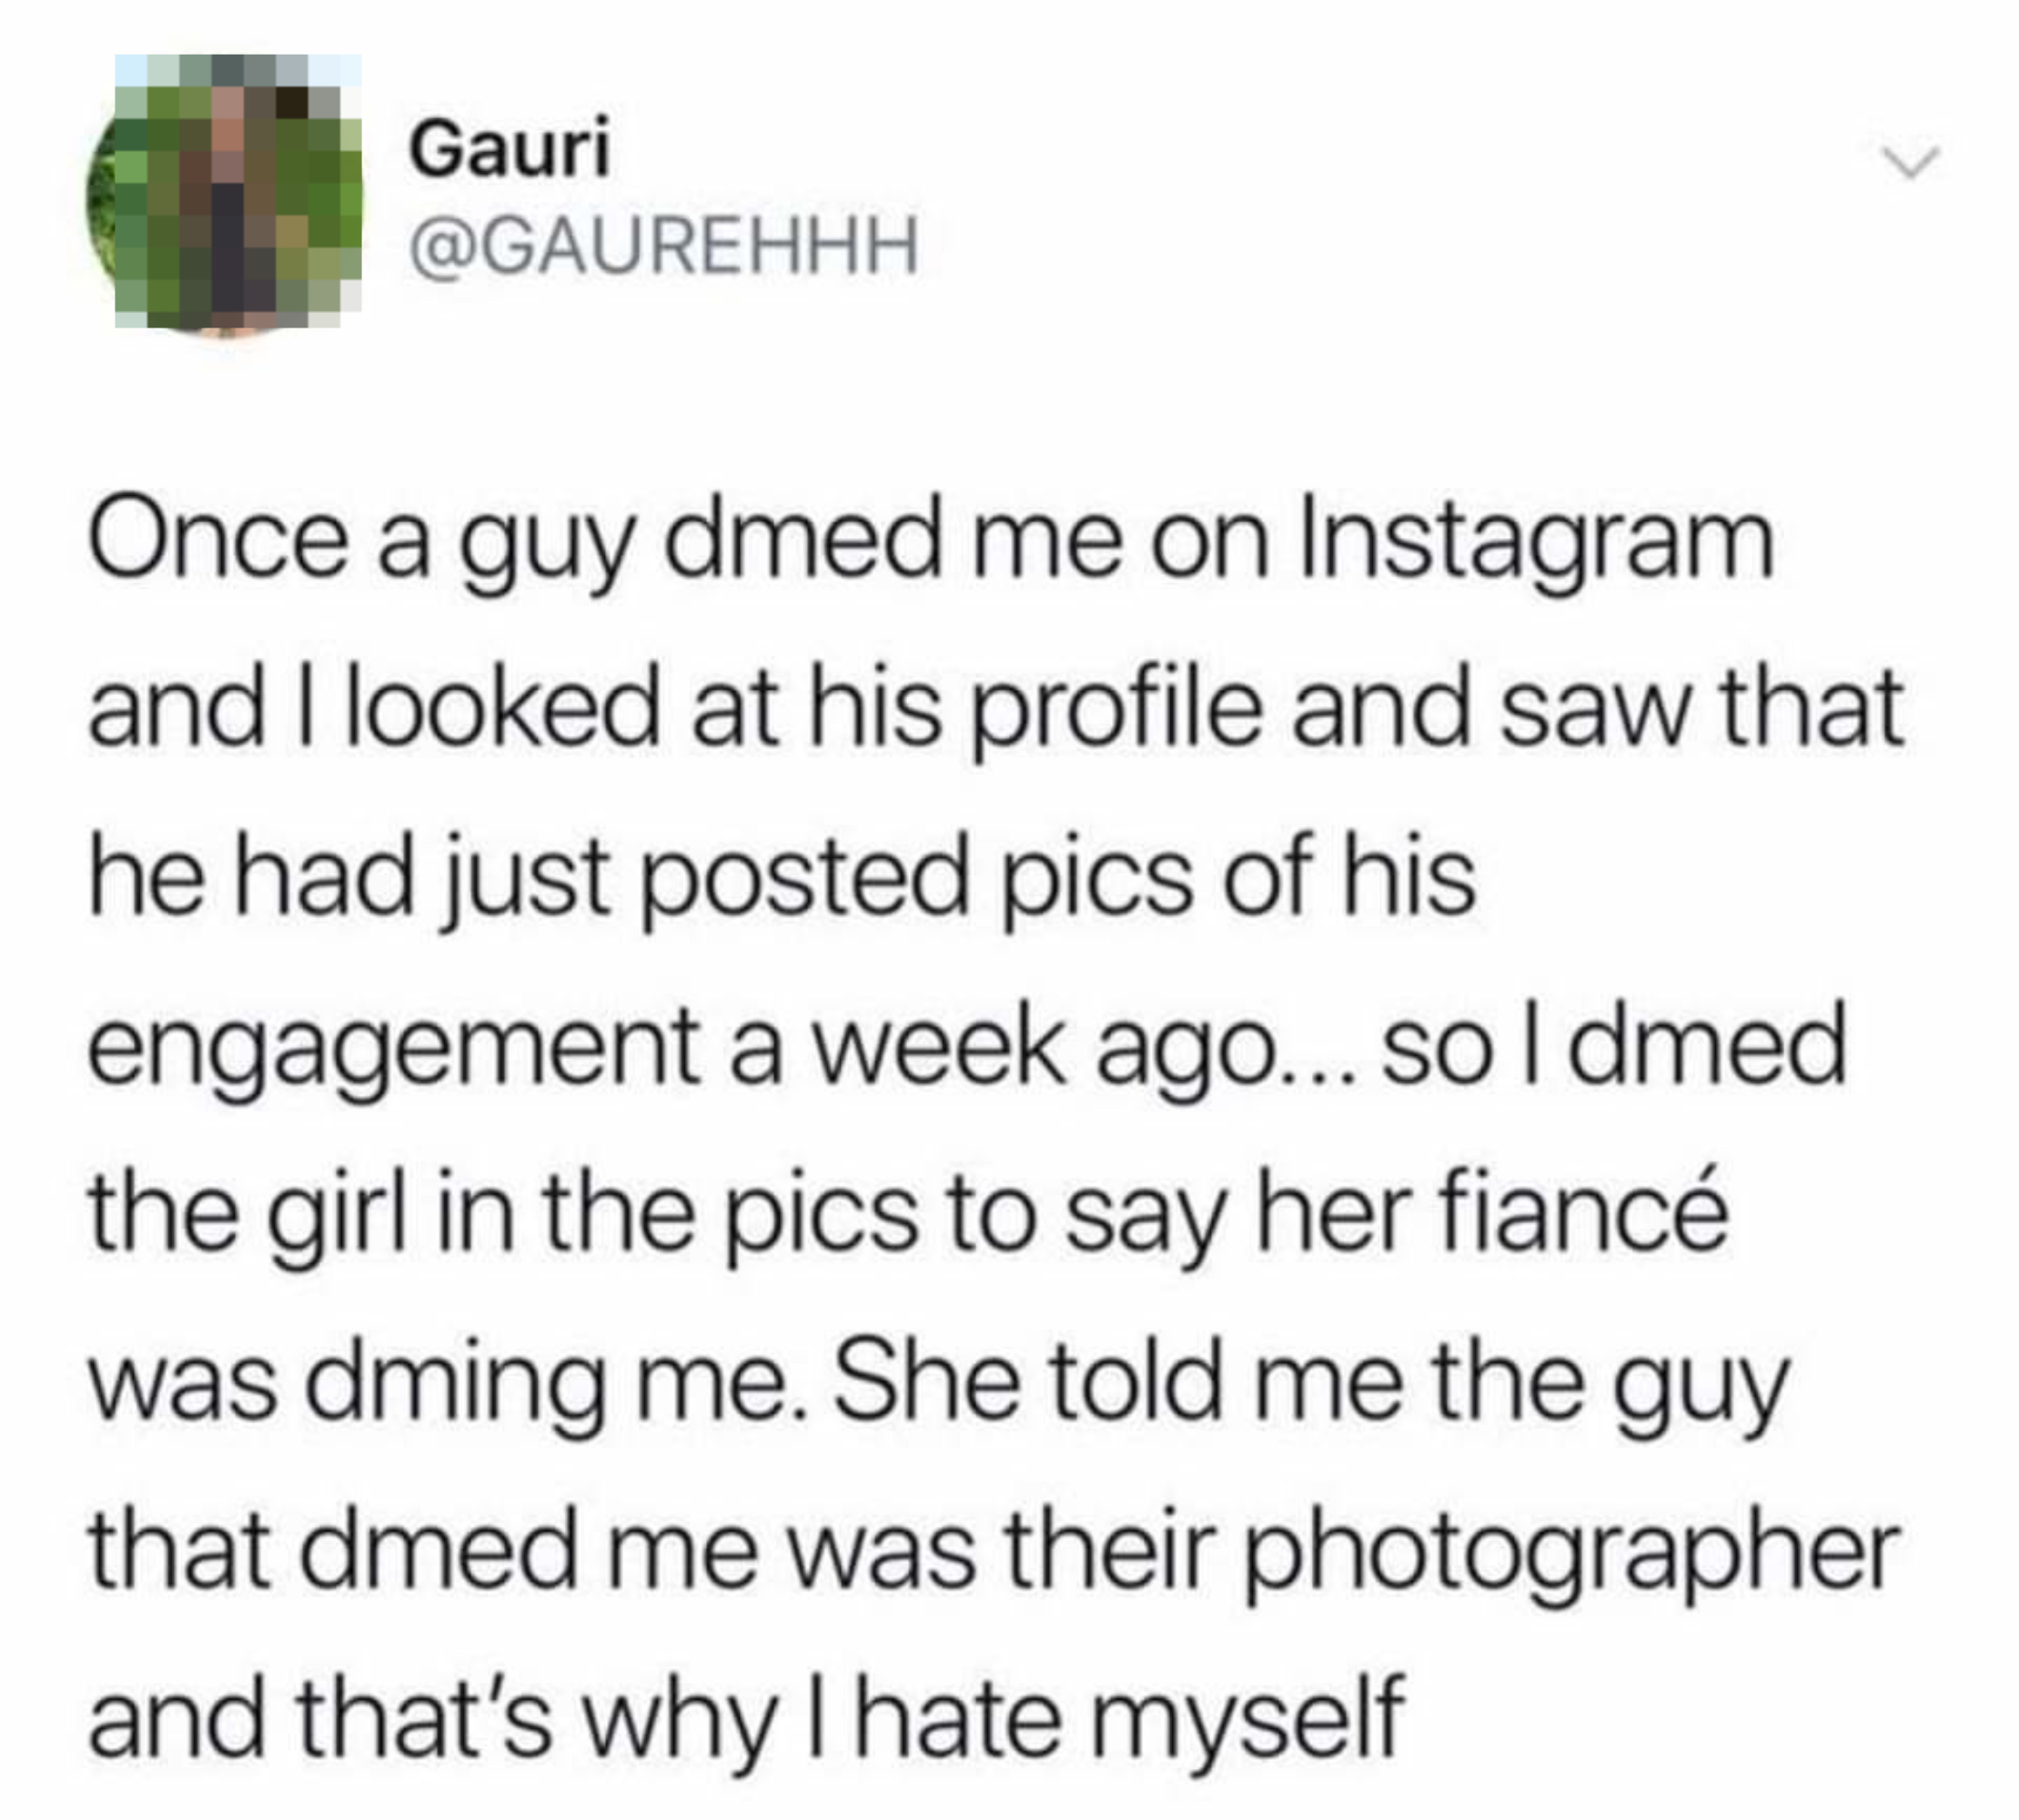 Tweet by user Gauri sharing a story about mistakenly thinking a newly engaged man was flirting, only to learn he was just a photographer